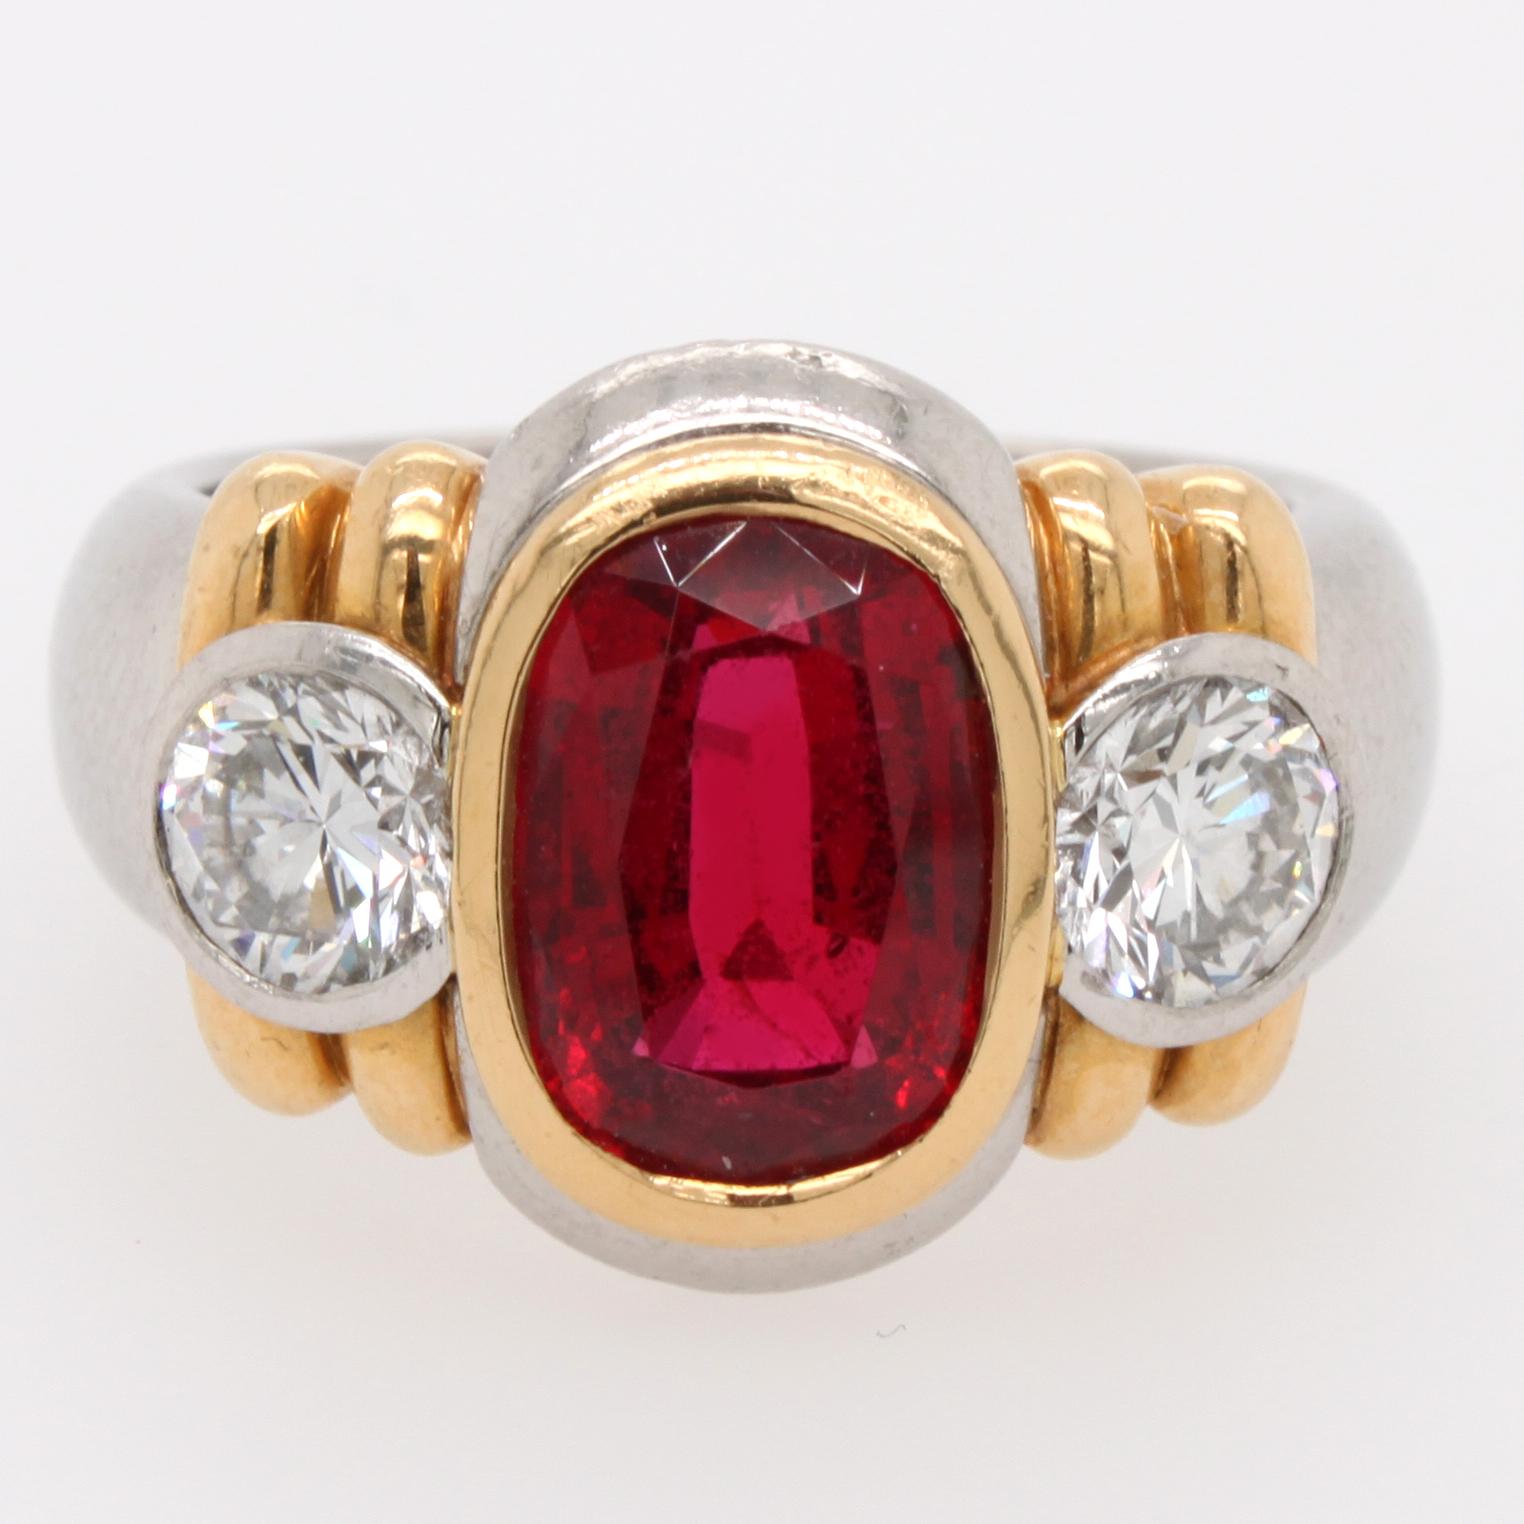 A very attractive modern spinel and diamond ring in platinum. The spinel has a fiery red colour and a beautiful crystal. It weighs approximately 3 carats and is a natural untreated, not heated, gemstone - accompanied by a gemological certificate. It